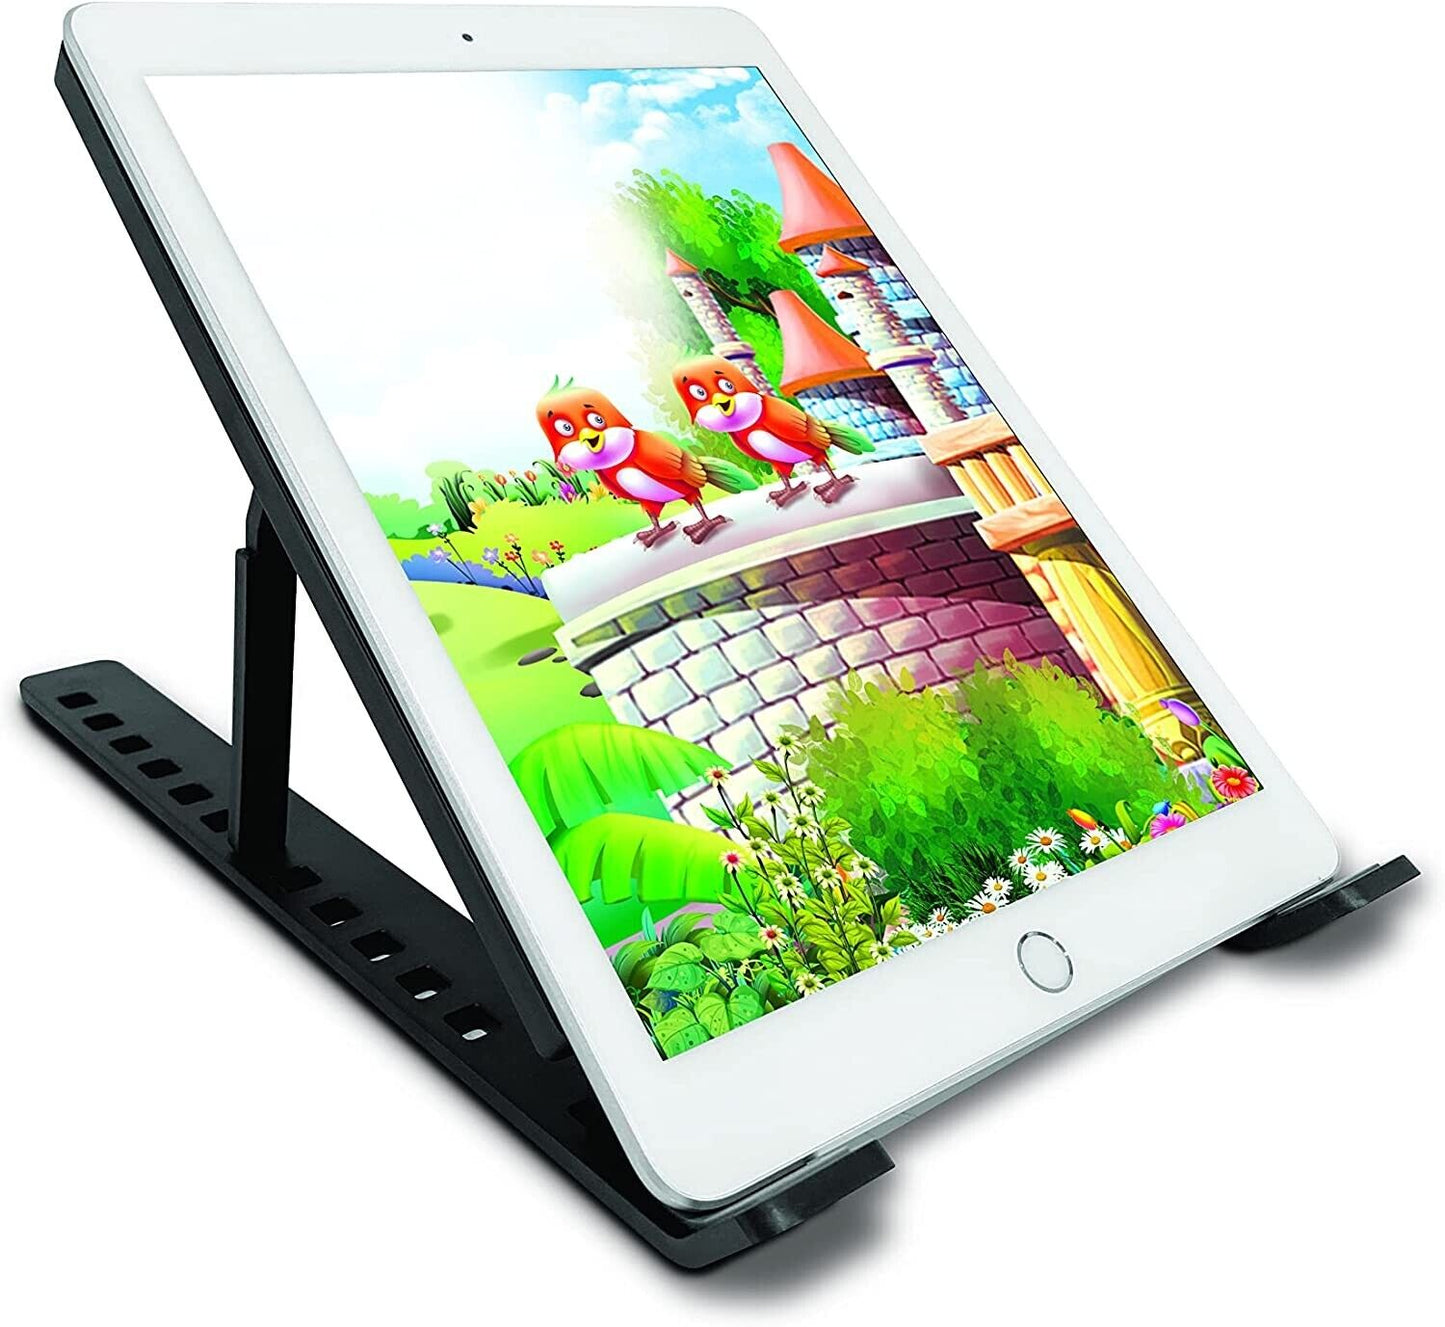 Perfect View Adjustable Laptop and Tablet Stand - Folds & Expands for Travel New